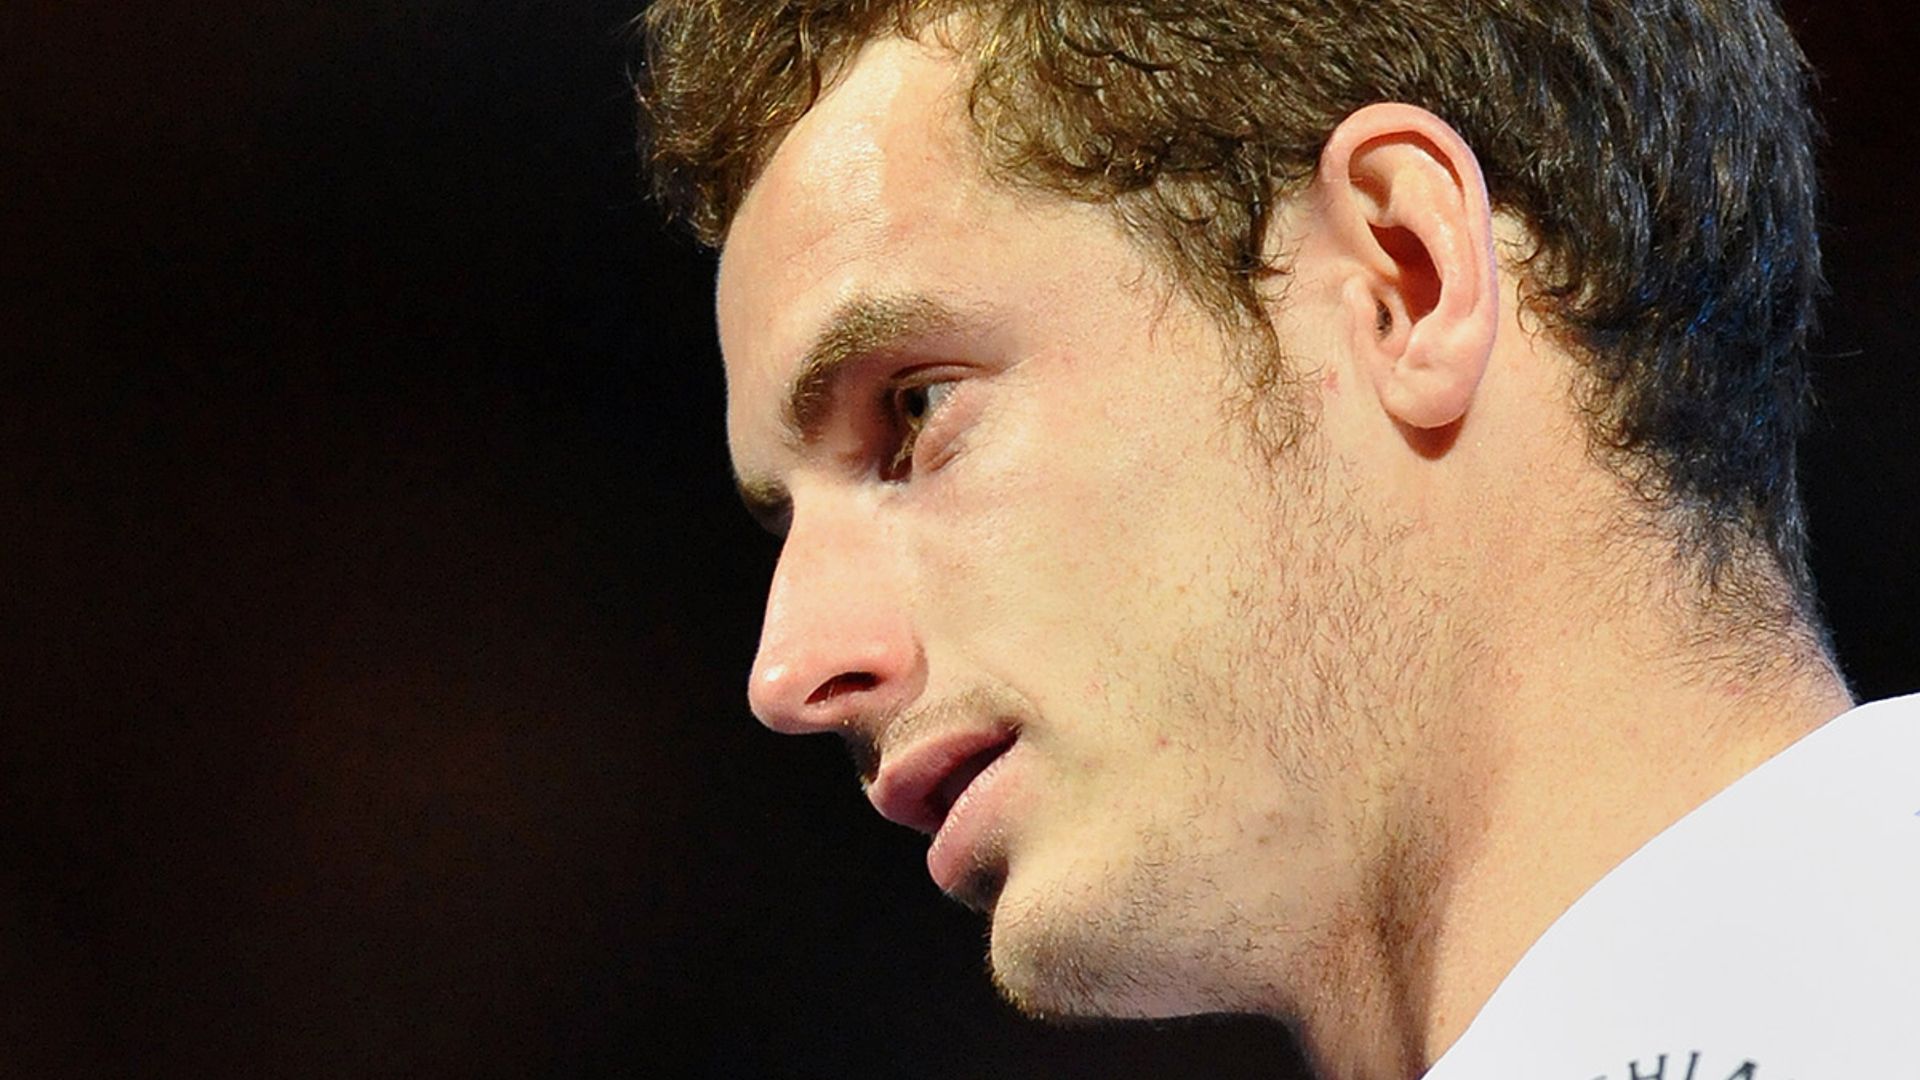 Andy Murray breaks silence and admits he feels 'crushed' after shock Olympic exit